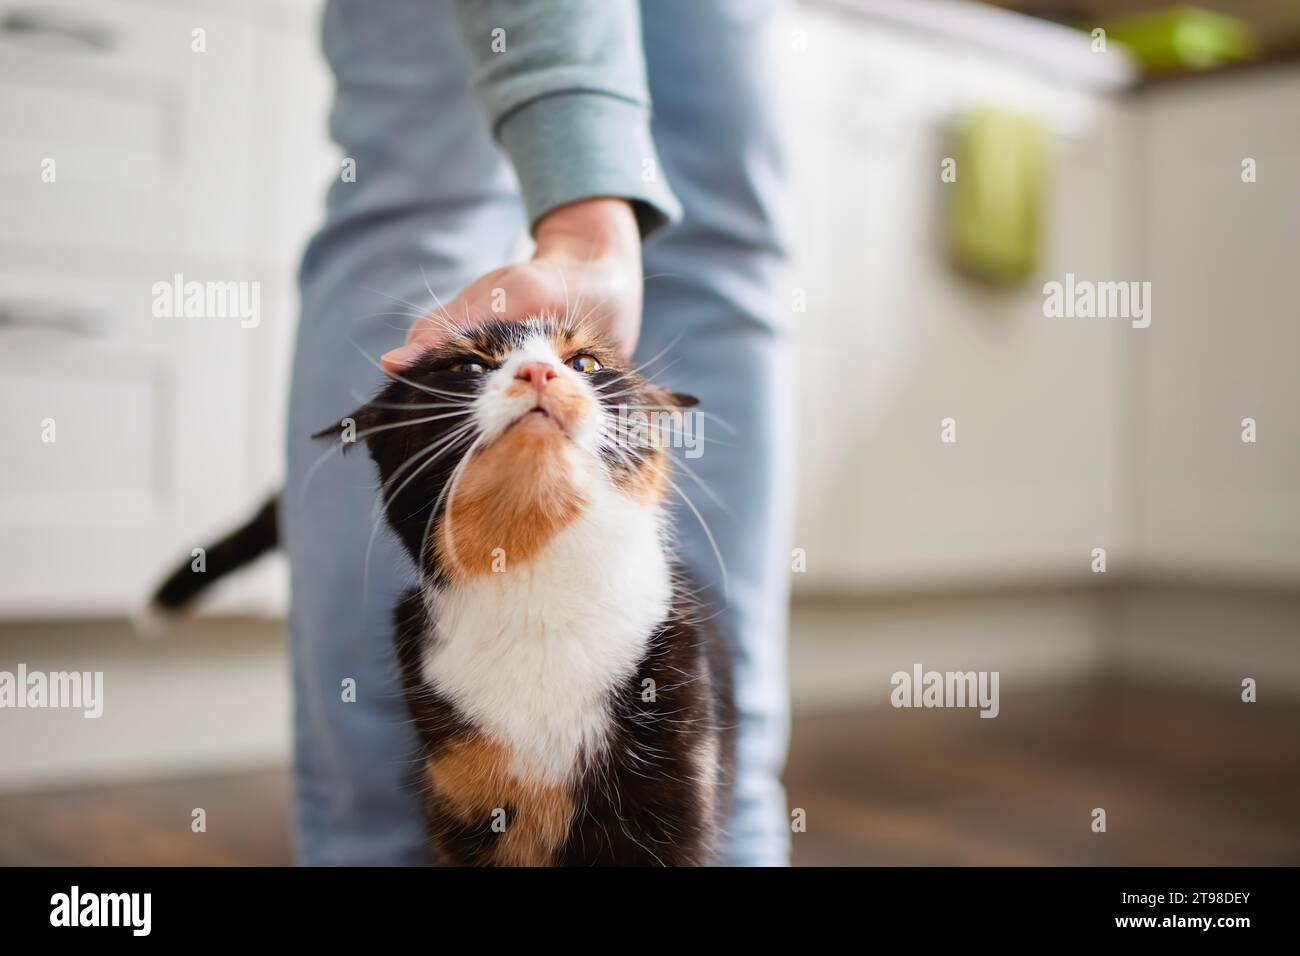 Domestic life with pet. Welcoming cat with its owner at home. Hand of man stroking tabby cat. Stock Photo